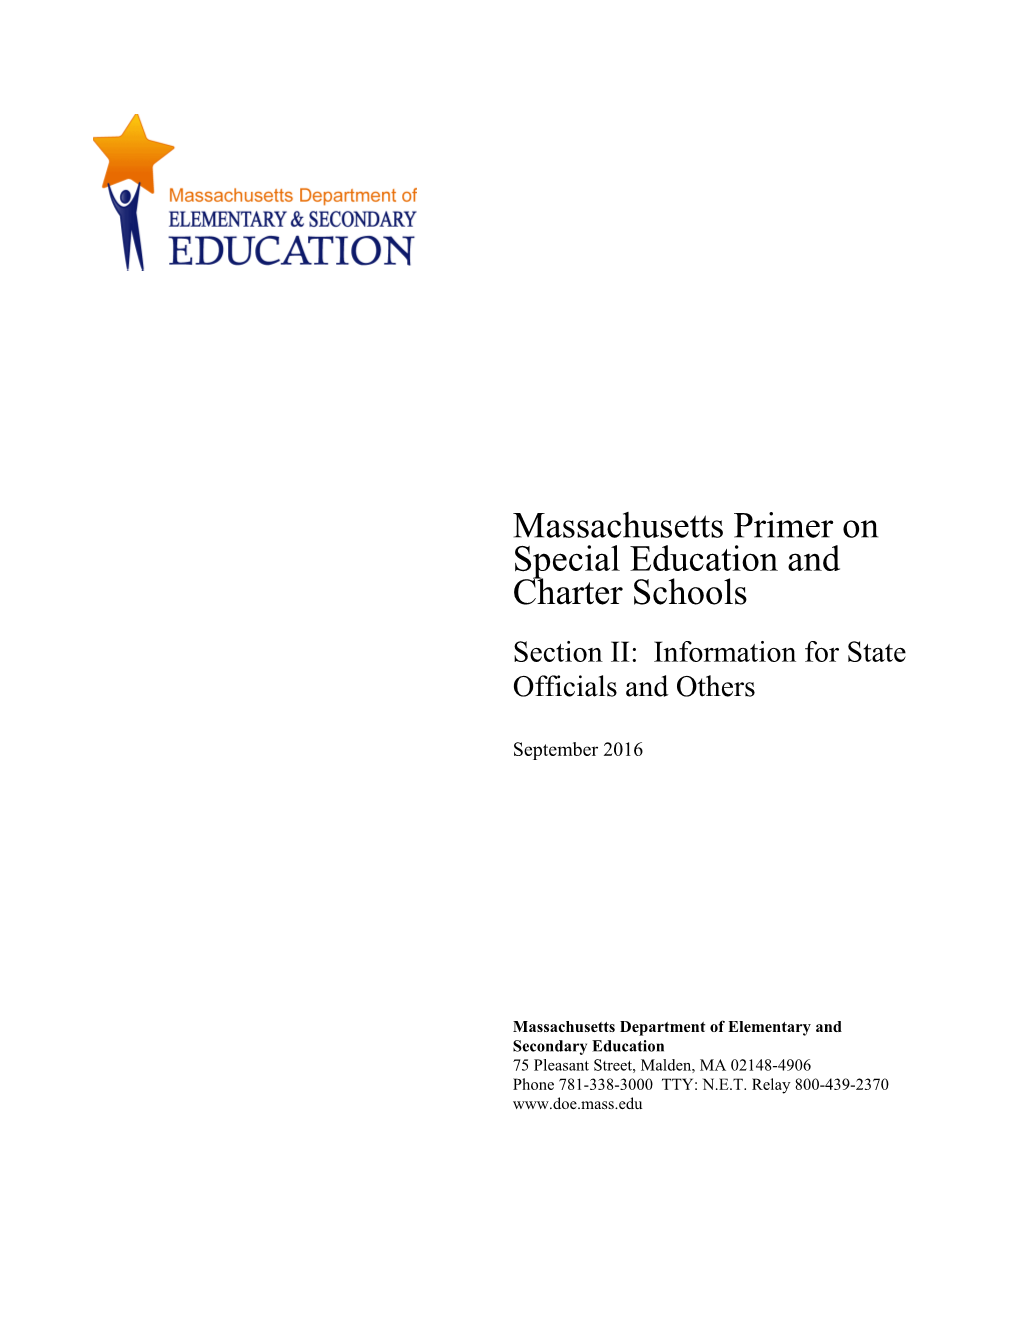 Massachusetts Primer on Special Education and Charter Schools Part II: Information For